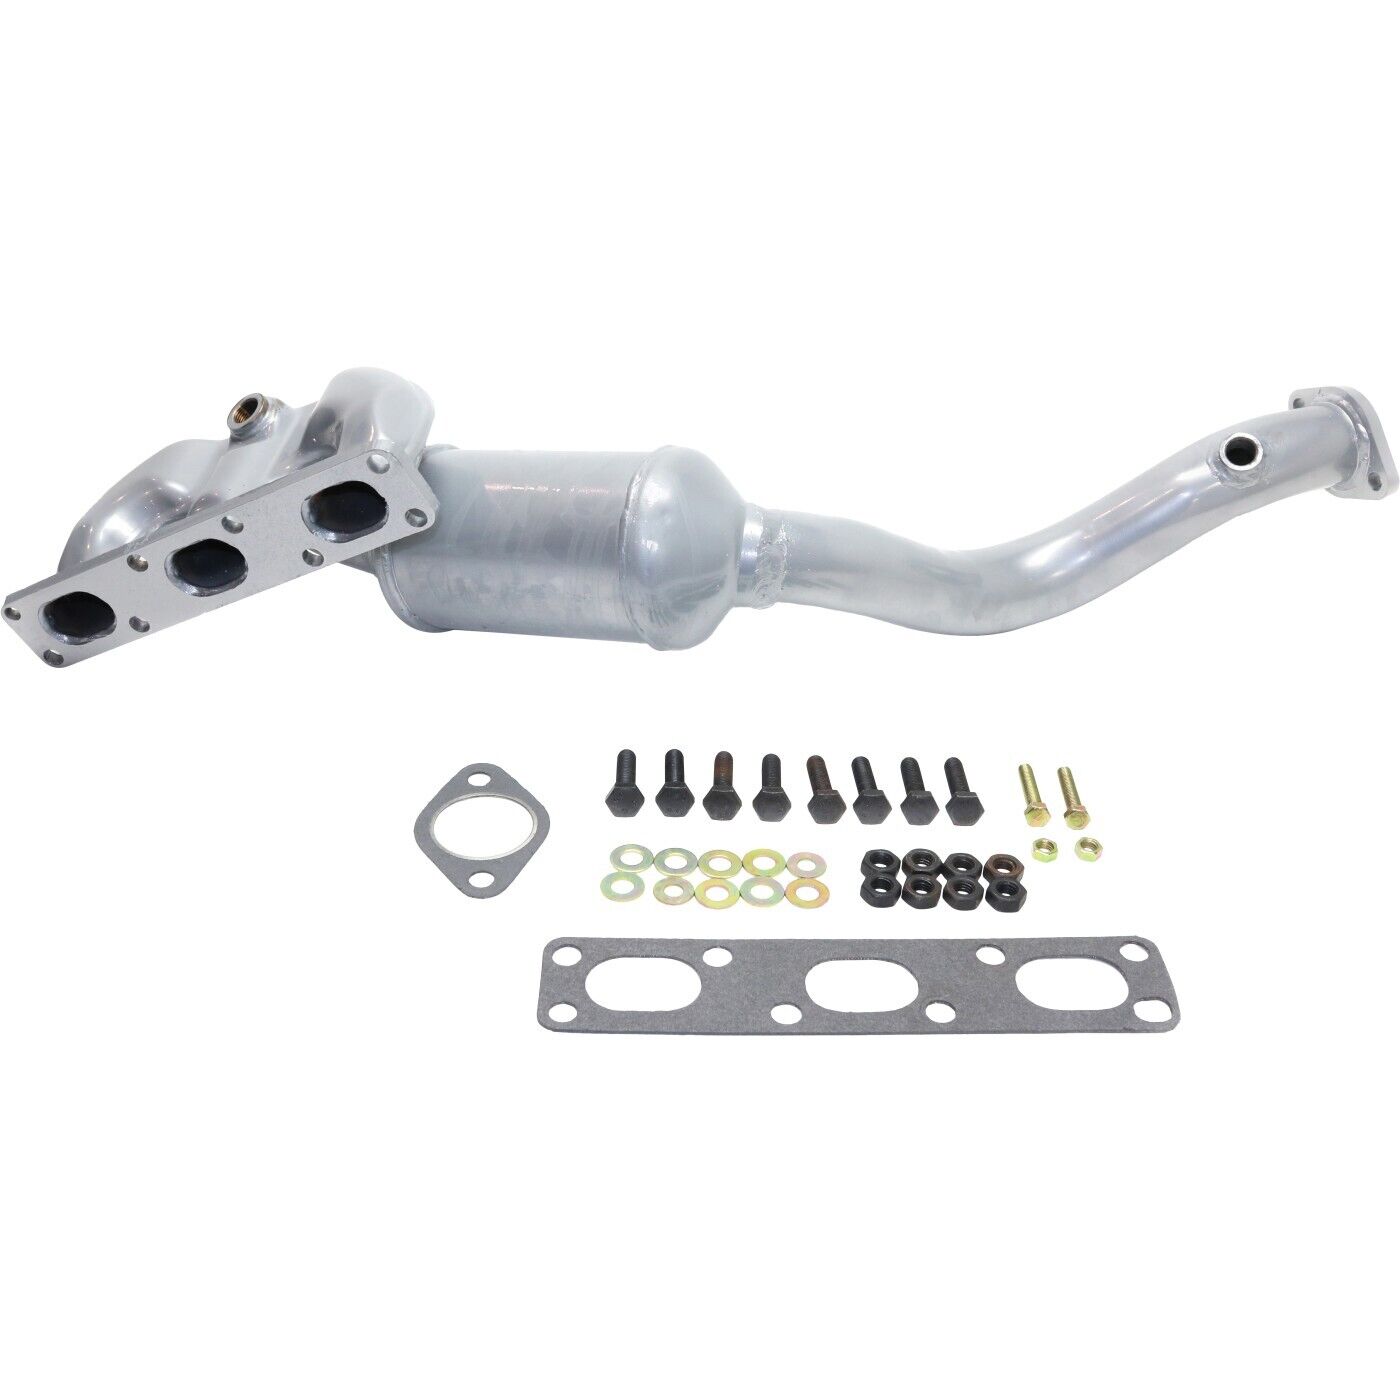 Catalytic Converter 46-State Legal Front For 2001-05 BMW 325i 335Xi 01-06 325Ci